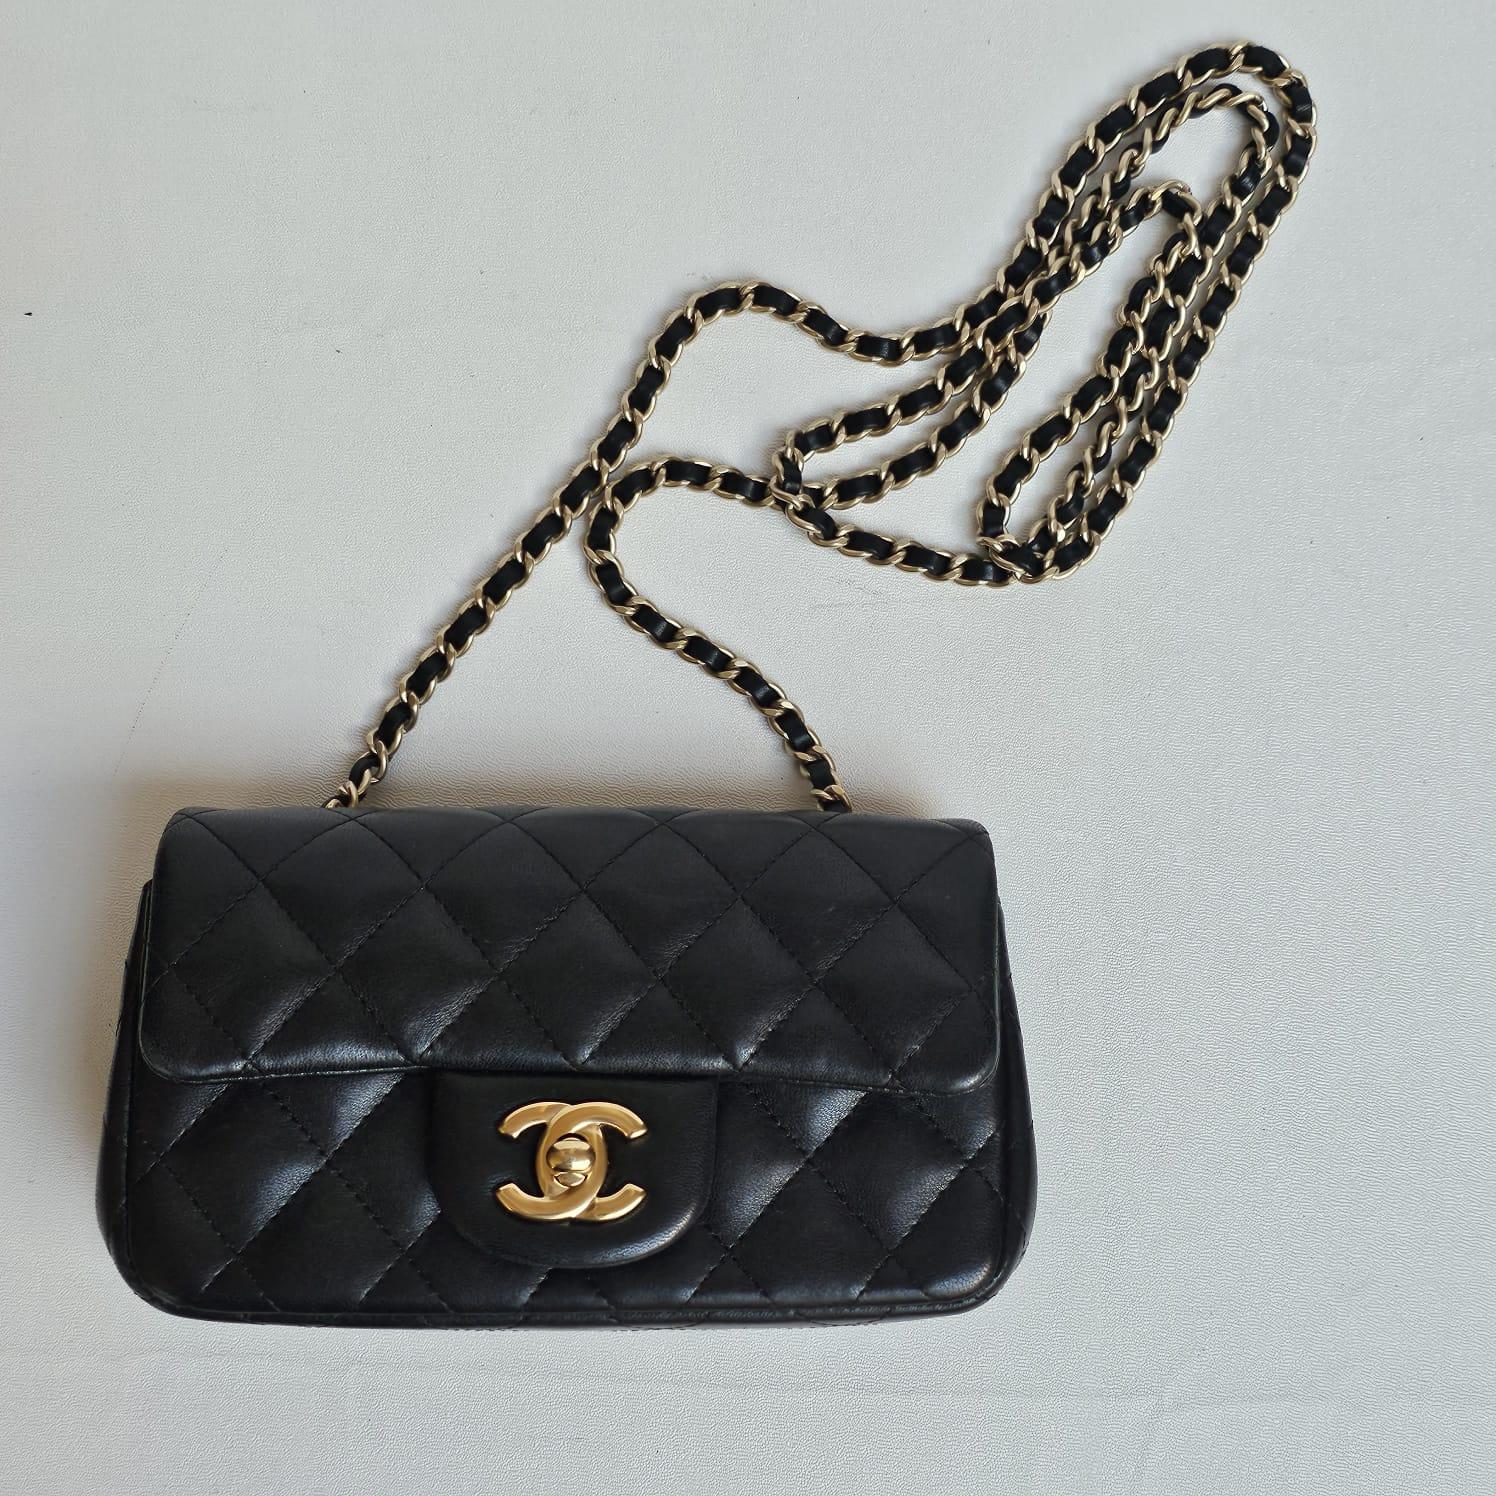 Chanel Black Lambskin Quilted Extra Mini Flap Bag In Good Condition For Sale In Jakarta, Daerah Khusus Ibukota Jakarta